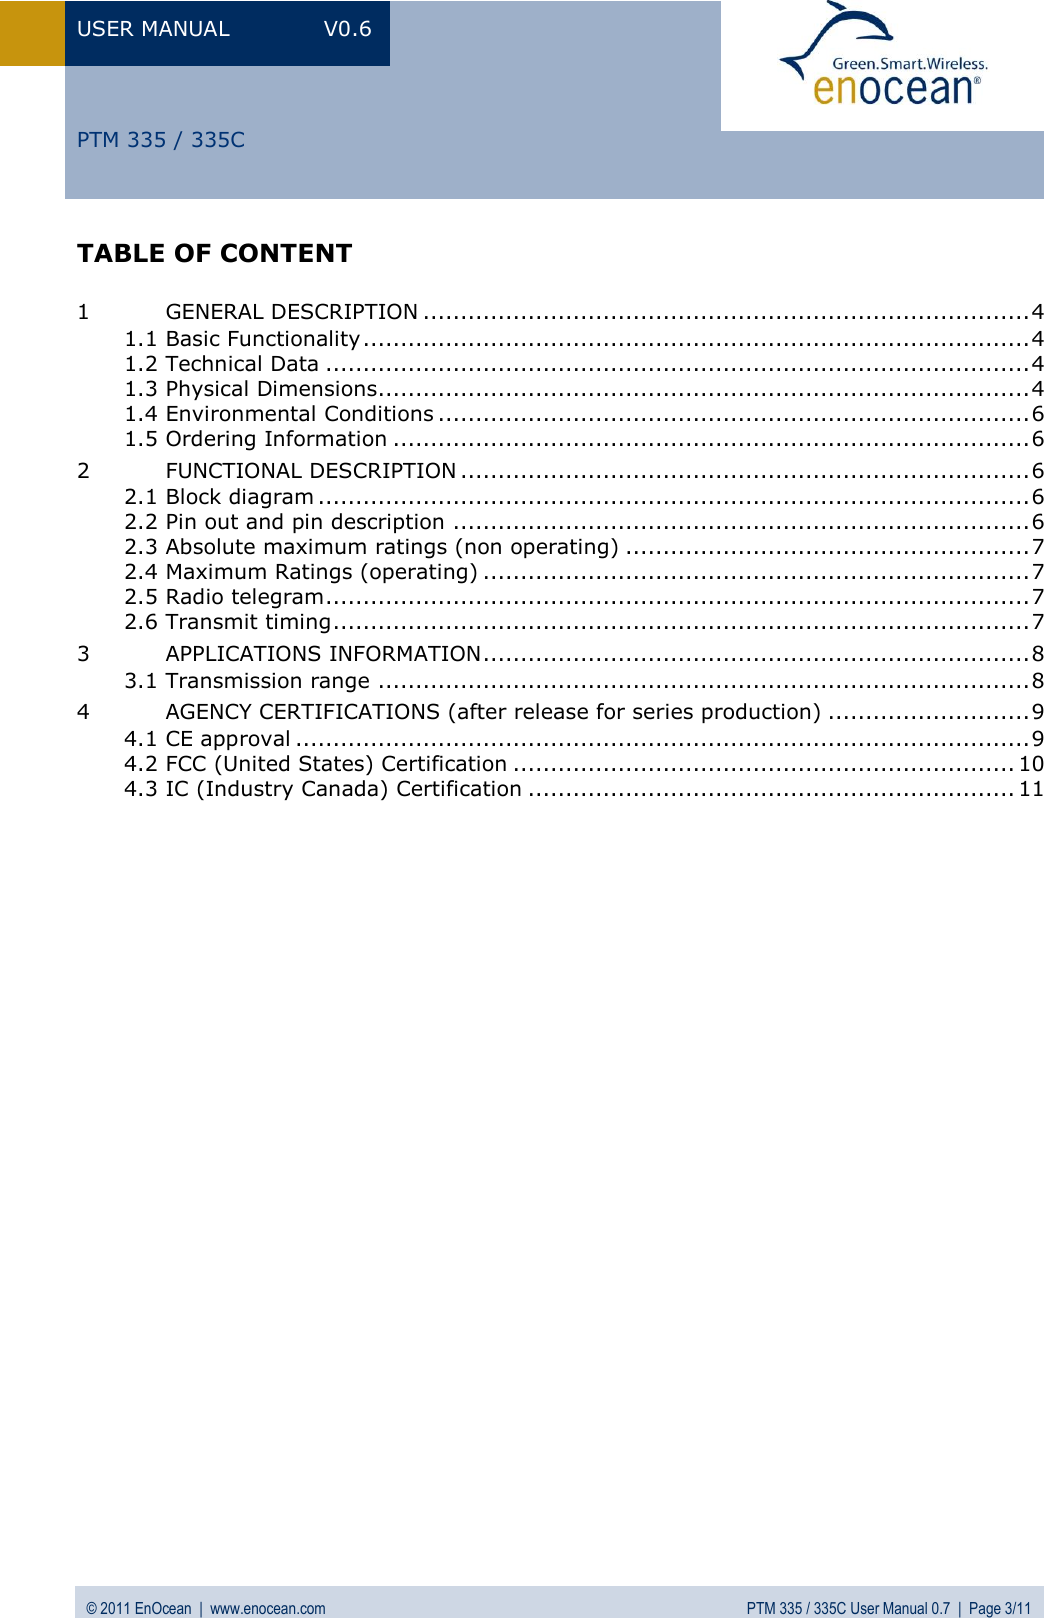 USER MANUAL  V0.6 © 2011 EnOcean  |  www.enocean.com  PTM 335 / 335C User Manual 0.7  |  Page 3/11   PTM 335 / 335C TABLE OF CONTENT  1 GENERAL DESCRIPTION ................................................................................. 4 1.1 Basic Functionality ......................................................................................... 4 1.2 Technical Data .............................................................................................. 4 1.3 Physical Dimensions....................................................................................... 4 1.4 Environmental Conditions ............................................................................... 6 1.5 Ordering Information ..................................................................................... 6 2 FUNCTIONAL DESCRIPTION ............................................................................ 6 2.1 Block diagram ............................................................................................... 6 2.2 Pin out and pin description ............................................................................. 6 2.3 Absolute maximum ratings (non operating) ...................................................... 7 2.4 Maximum Ratings (operating) ......................................................................... 7 2.5 Radio telegram .............................................................................................. 7 2.6 Transmit timing ............................................................................................. 7 3 APPLICATIONS INFORMATION ......................................................................... 8 3.1 Transmission range ....................................................................................... 8 4 AGENCY CERTIFICATIONS (after release for series production) ........................... 9 4.1 CE approval .................................................................................................. 9 4.2 FCC (United States) Certification ................................................................... 10 4.3 IC (Industry Canada) Certification ................................................................. 11  